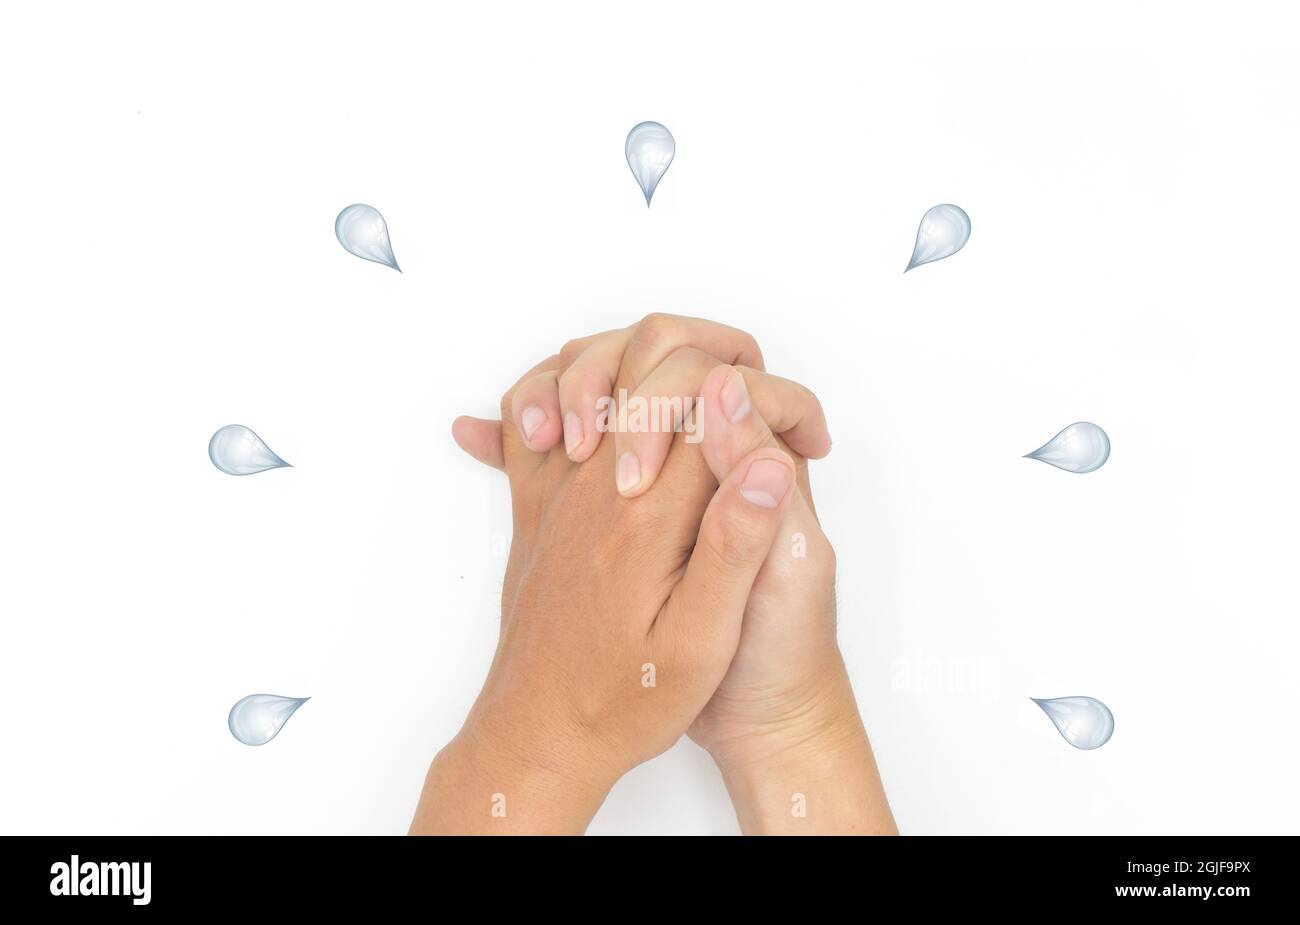 Concept of two sweating hands. Isolated on white background. Stock Photo